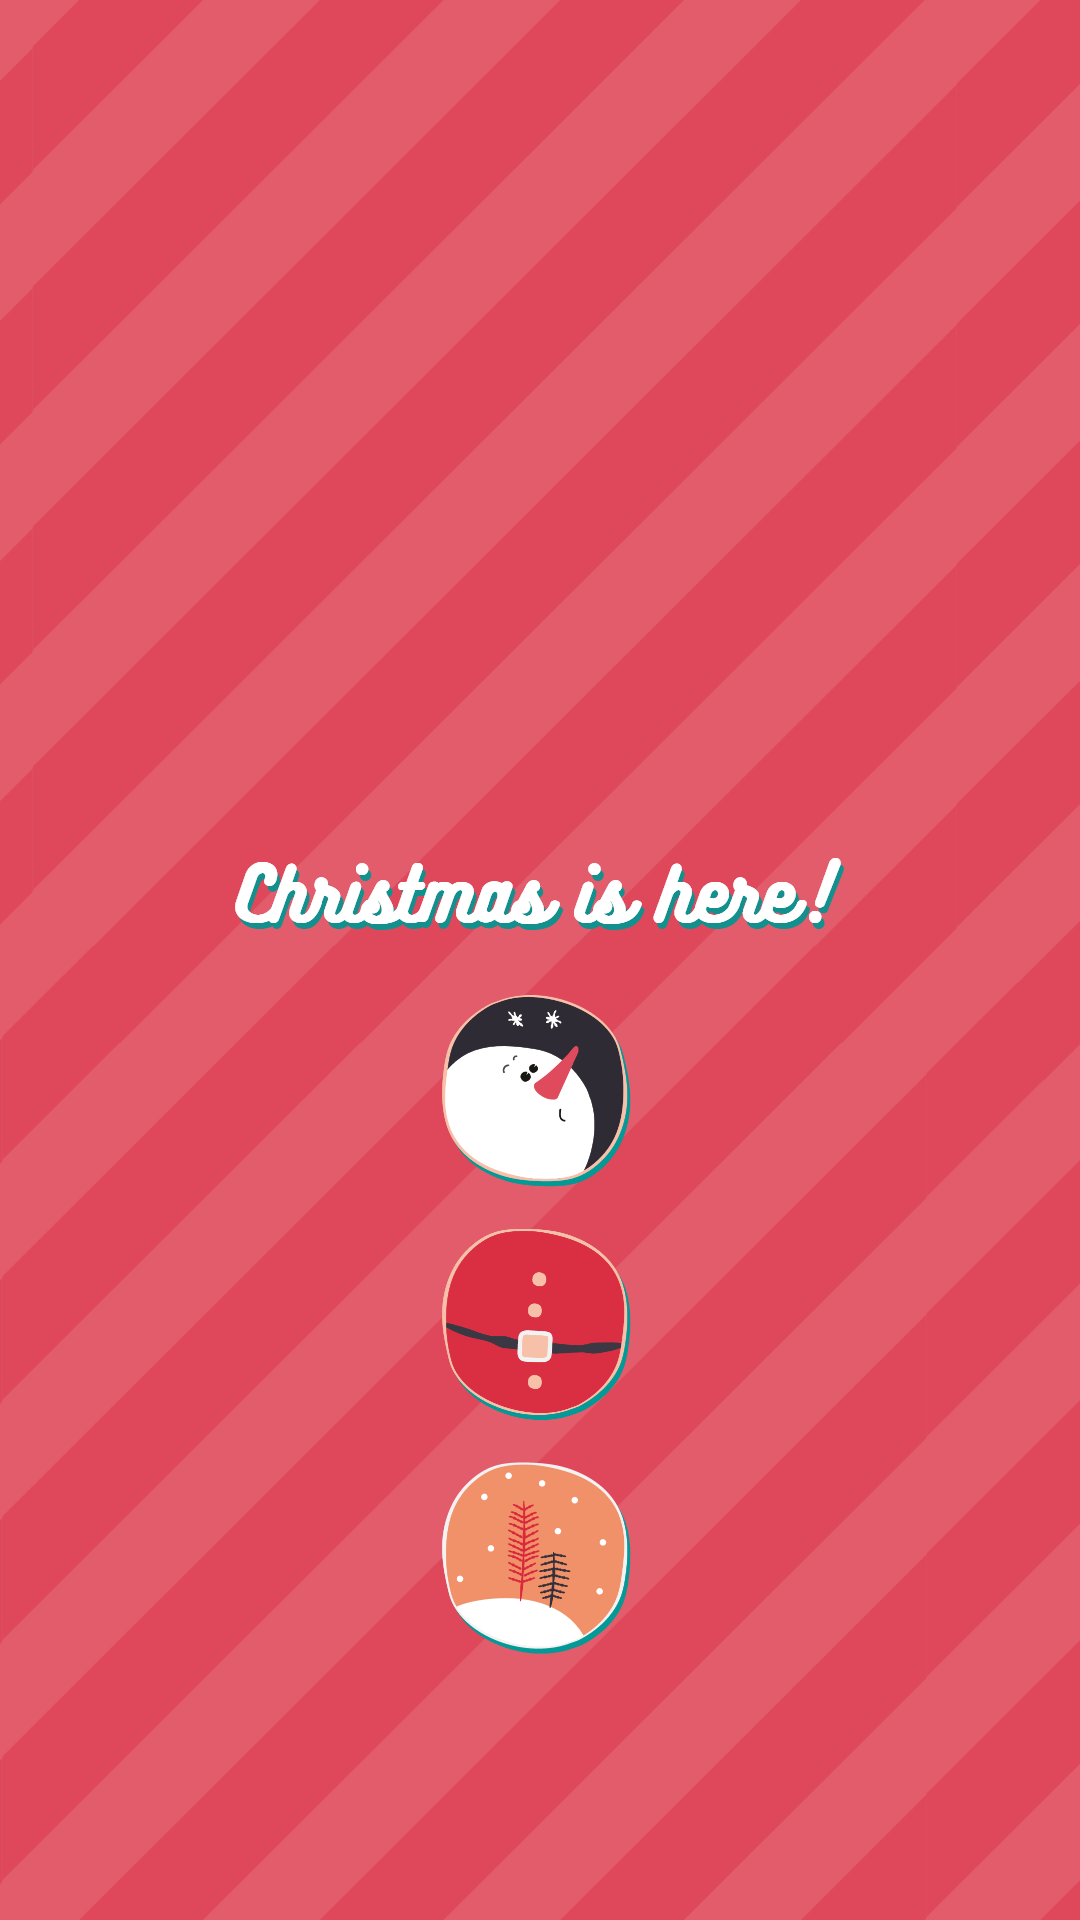 Christmas Wallpaper & Background for Your Holiday Celebration